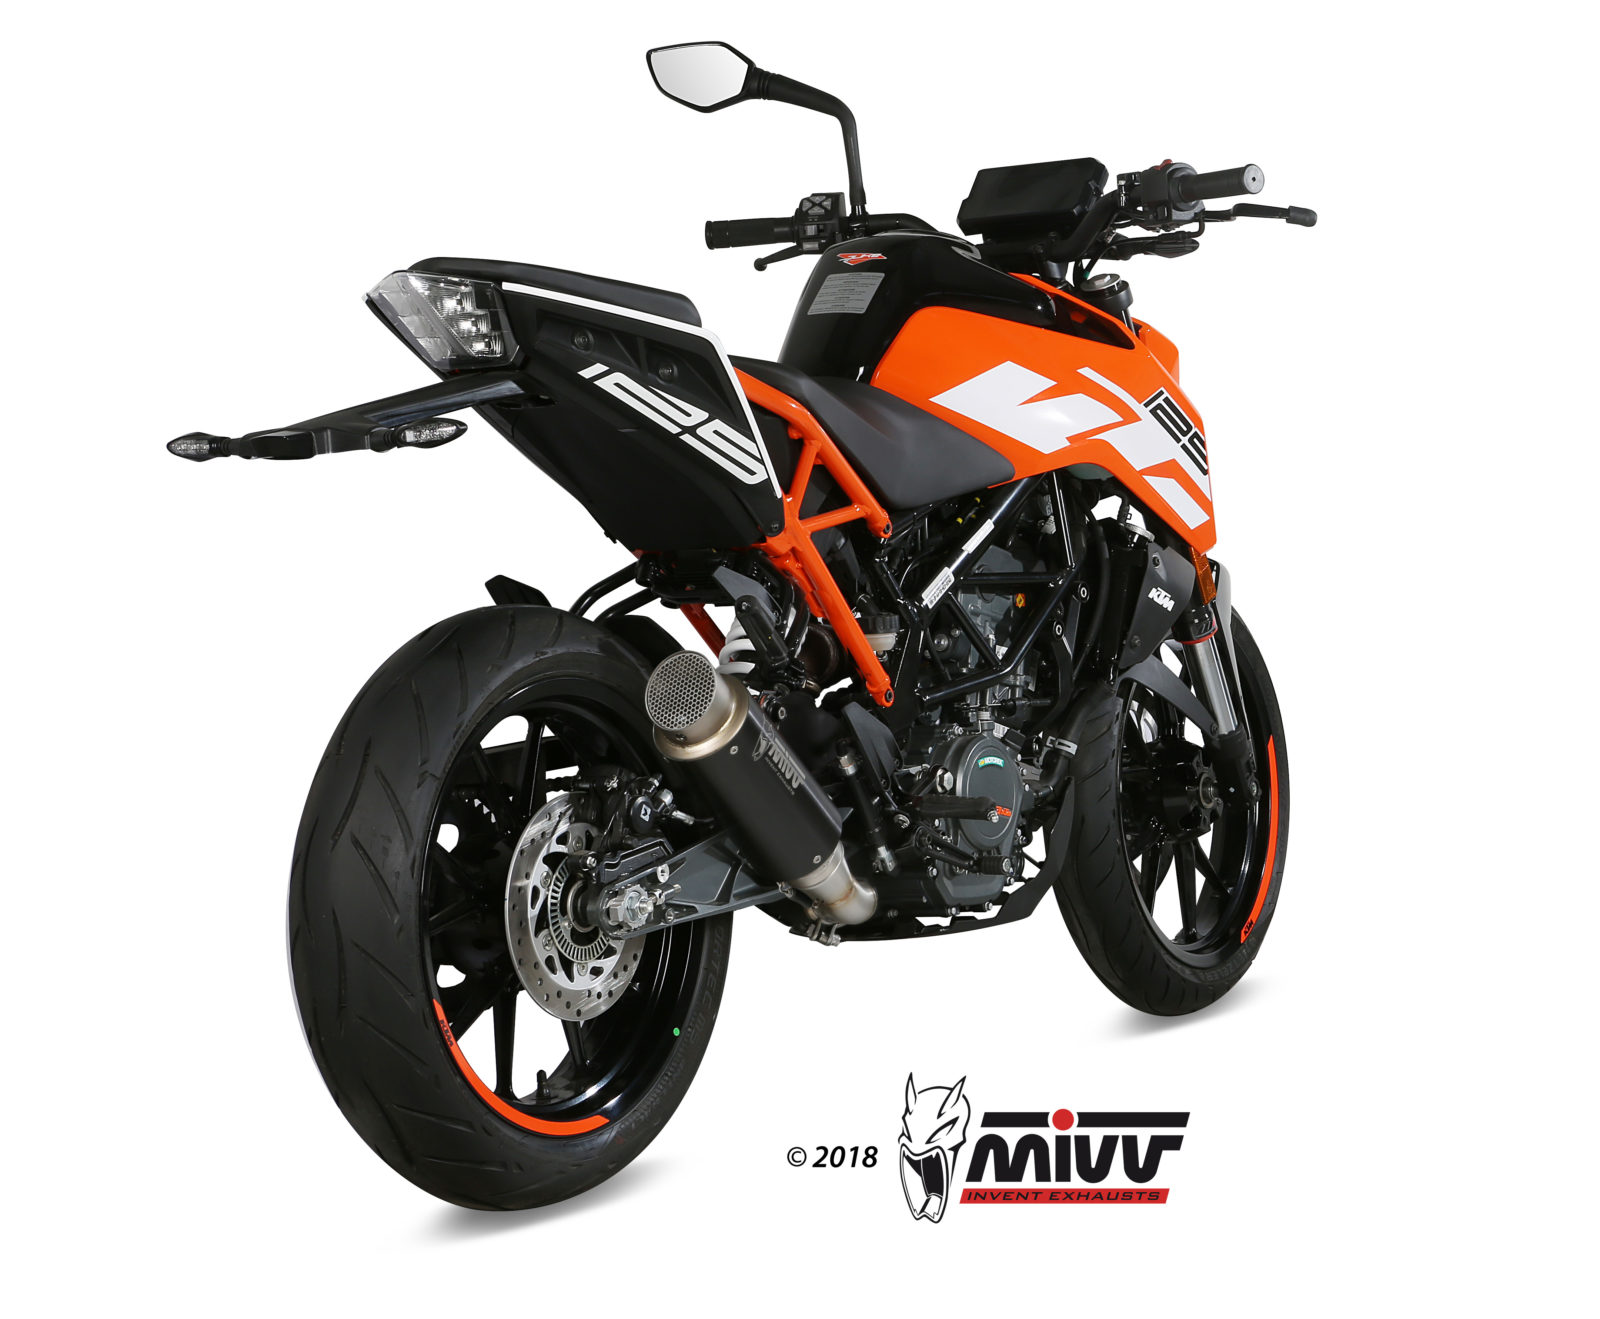 2020 BS6 KTM RC 125 Price, Top Speed & Mileage in India